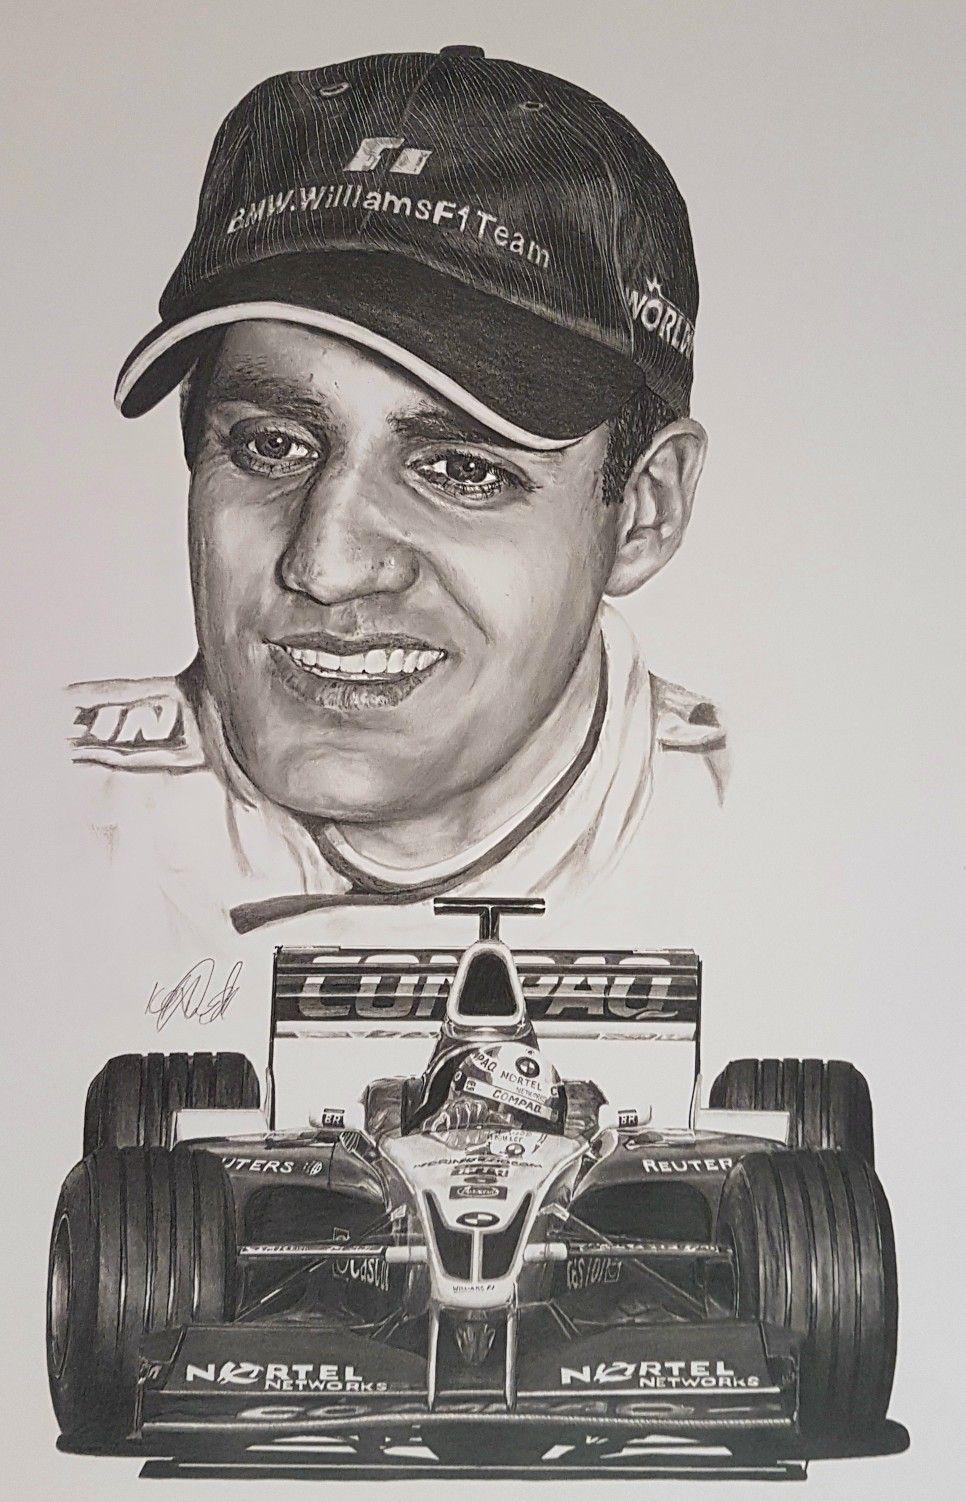 My pencil drawing of Juan Pablo Montoya back in the days he drove